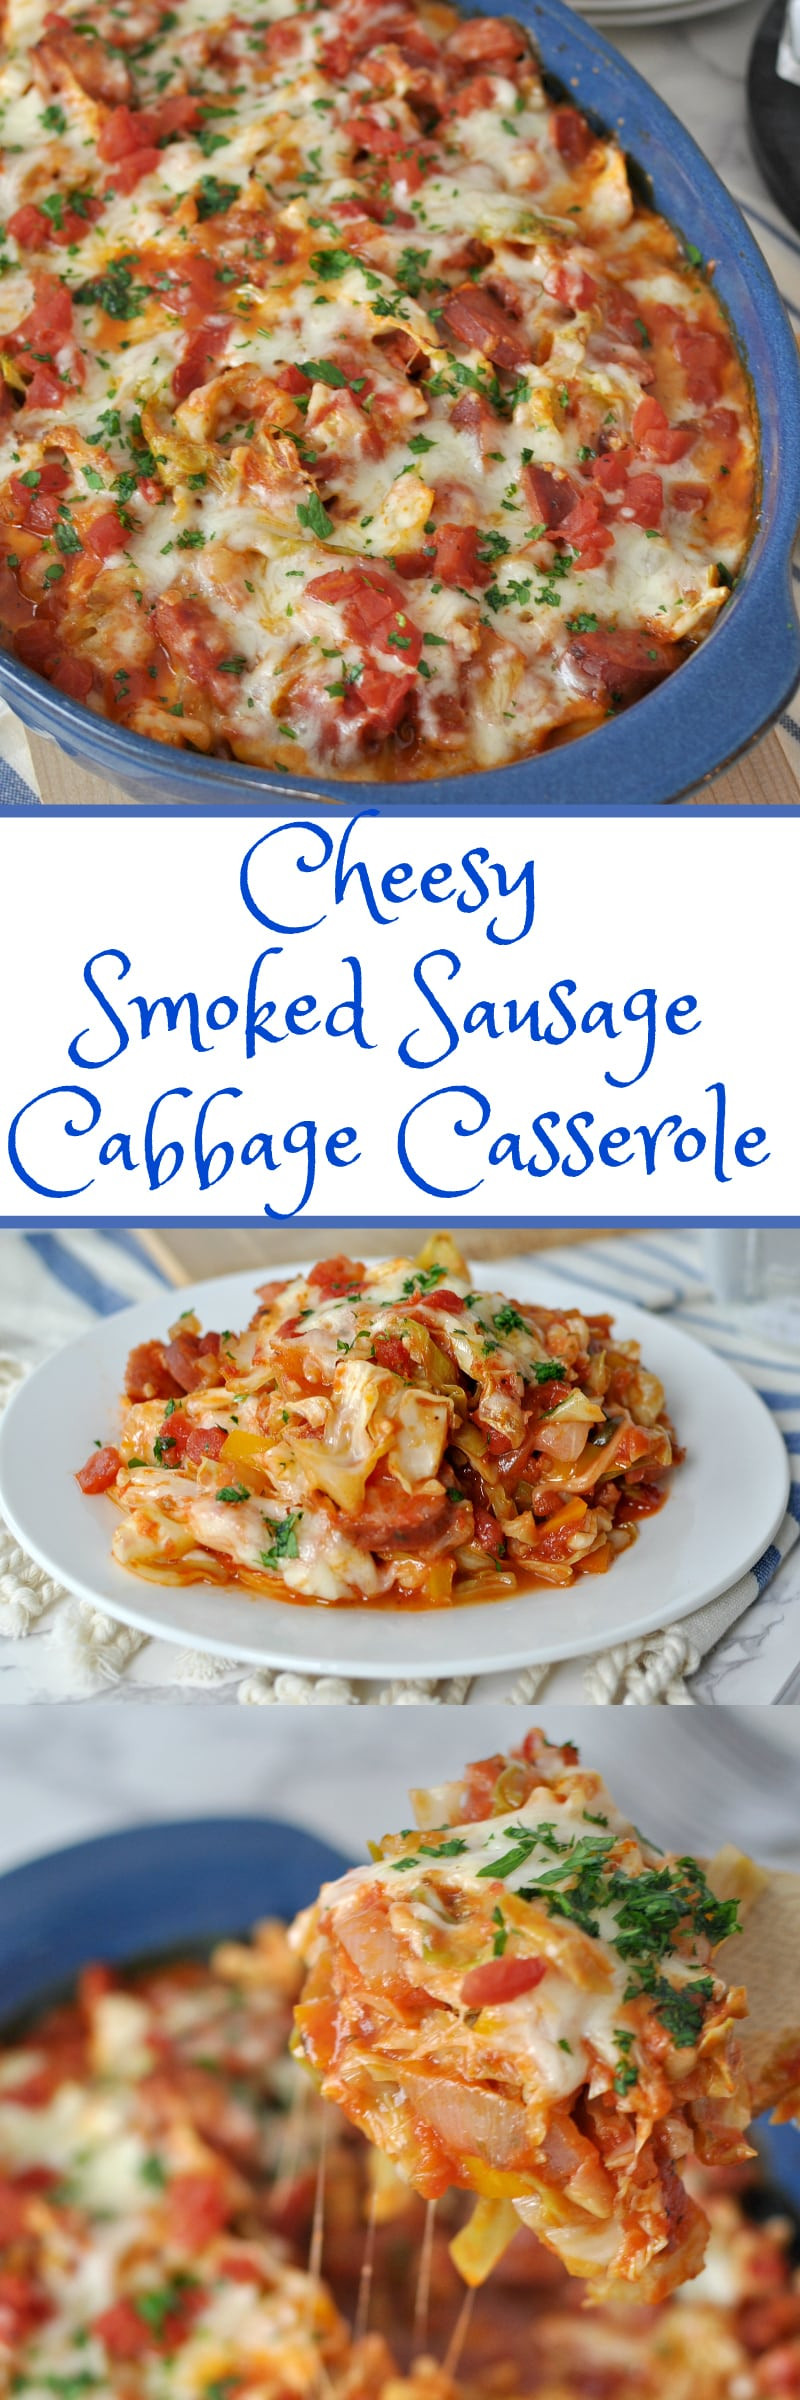 Low Carb Smoked Sausage Recipes
 Cheesy Sausage and Cabbage Casserole